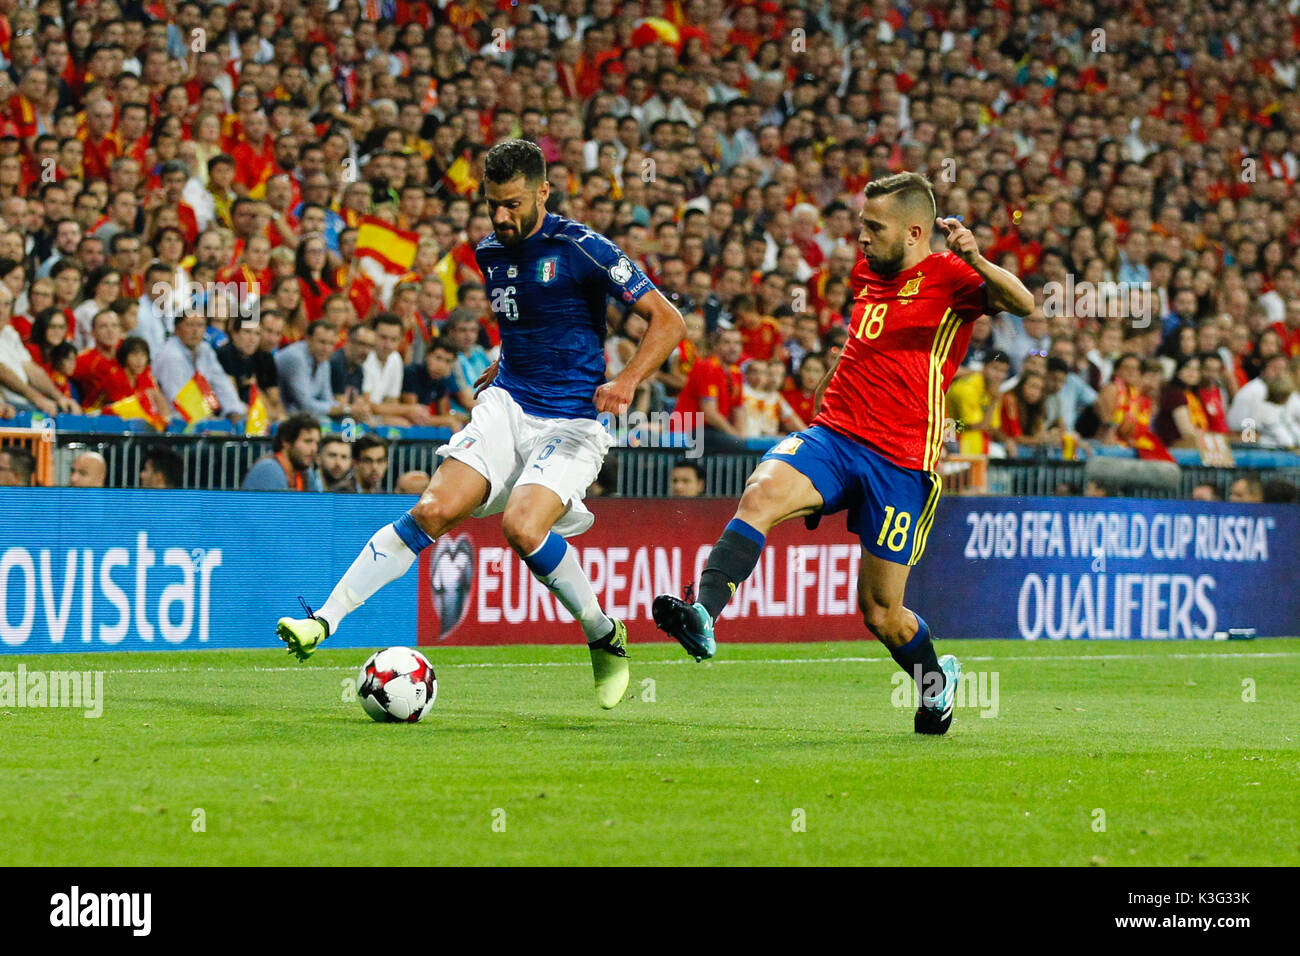 Antonio Candreva (6) Italian player. Jordi Alba (18) Spanish player.  In action during the qualifying match for the 2018 World Cup, Round 7, between Spain vs Italy at the Santiago Bernabeu stadium in Madrid, Spain, September 2, 2017 . Stock Photo